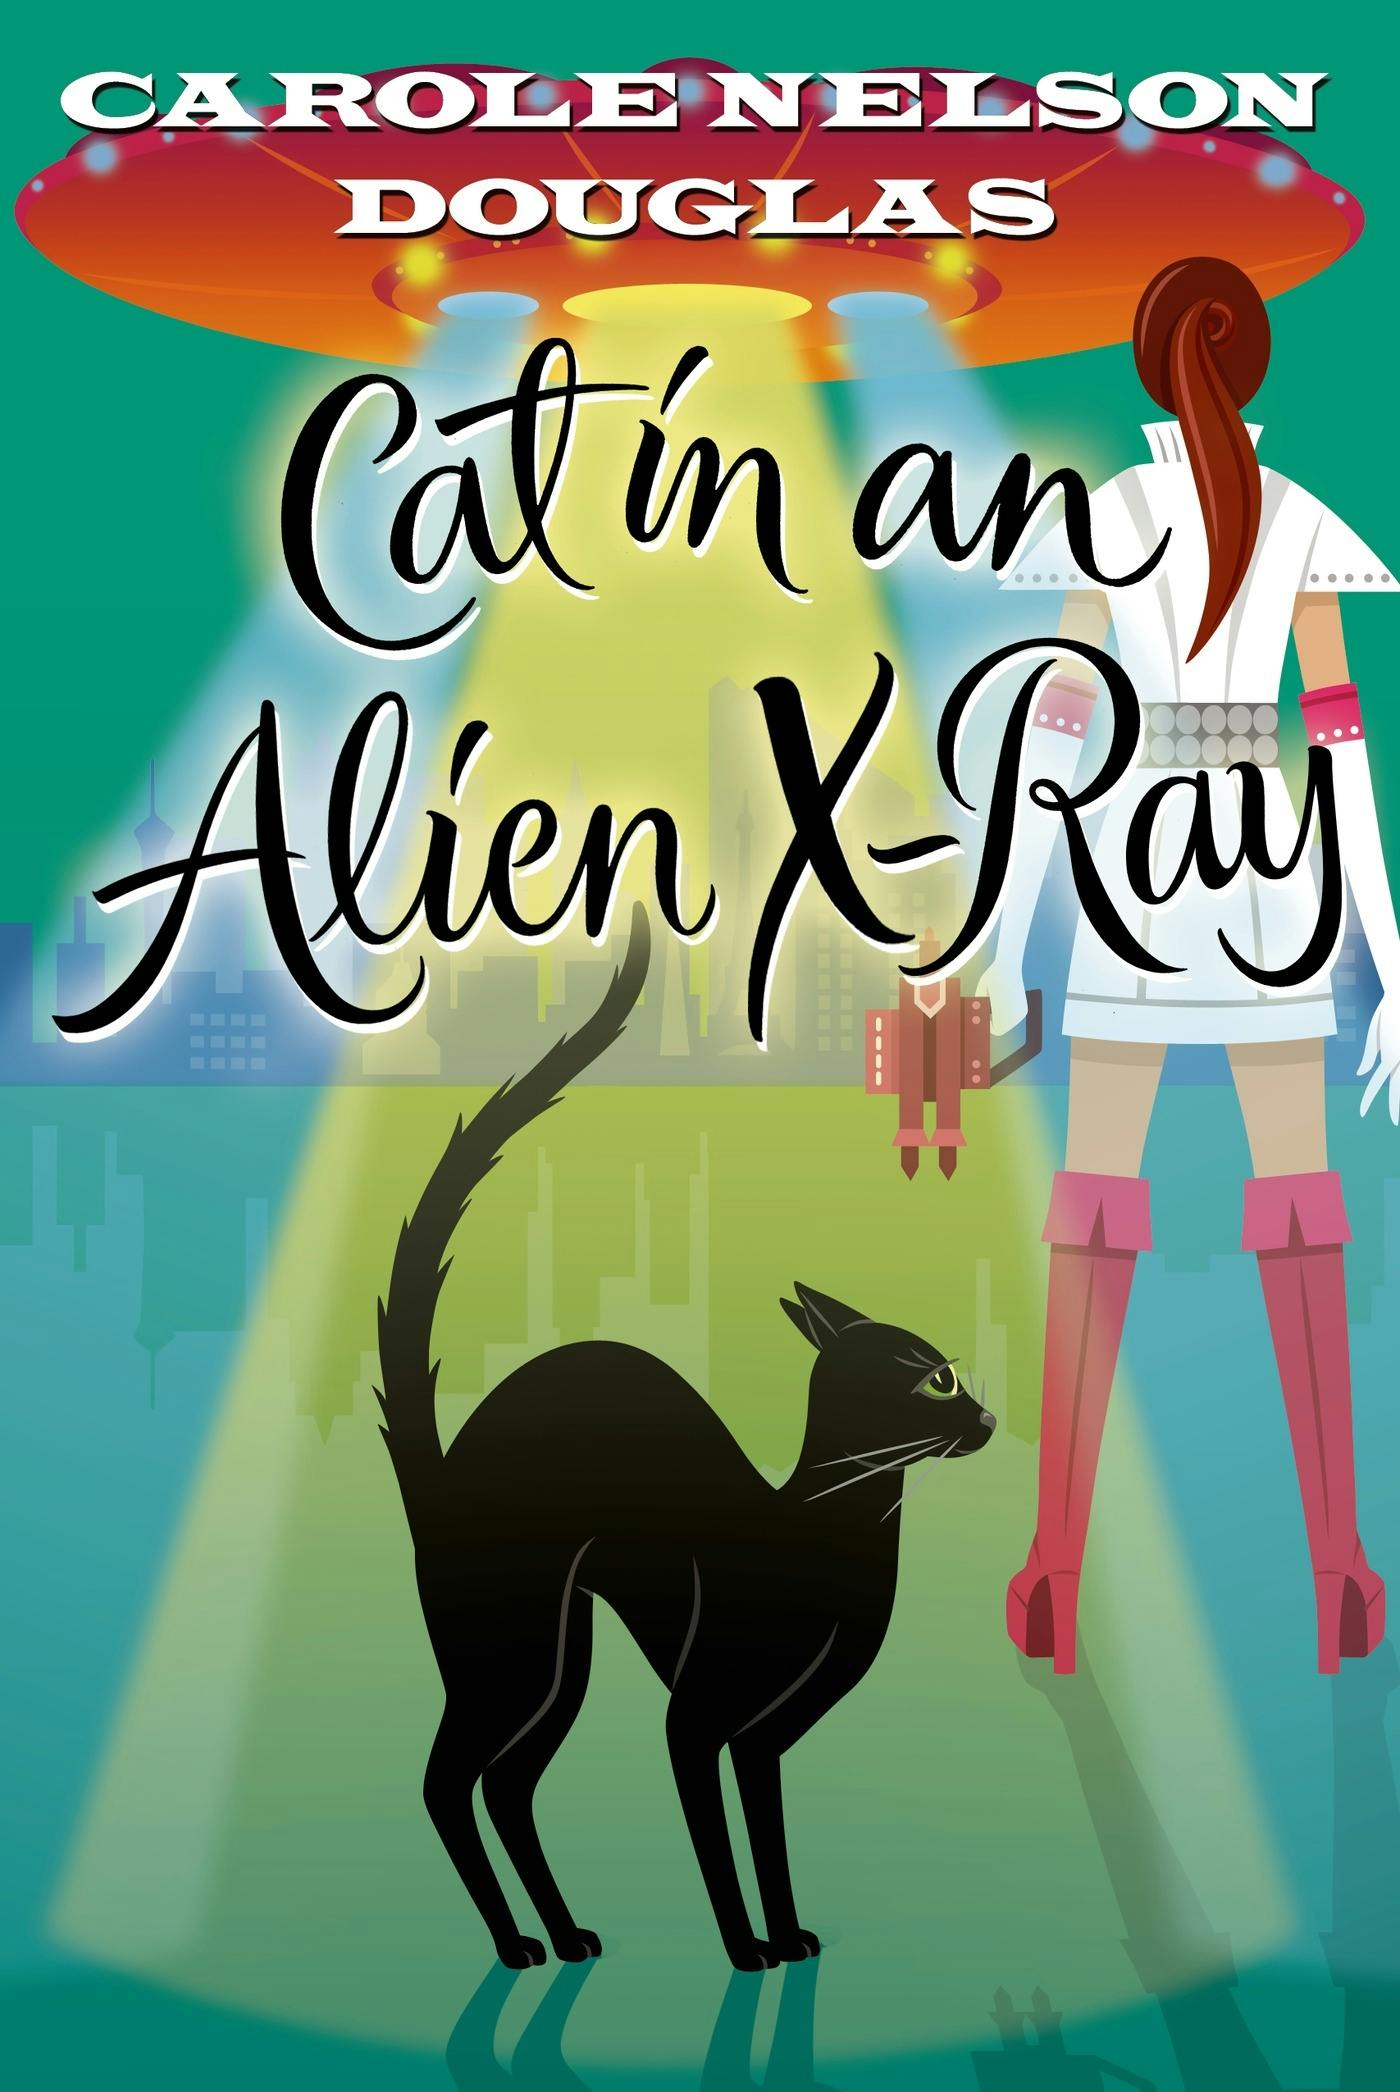 Cover for the book titled as: Cat in an Alien X-Ray